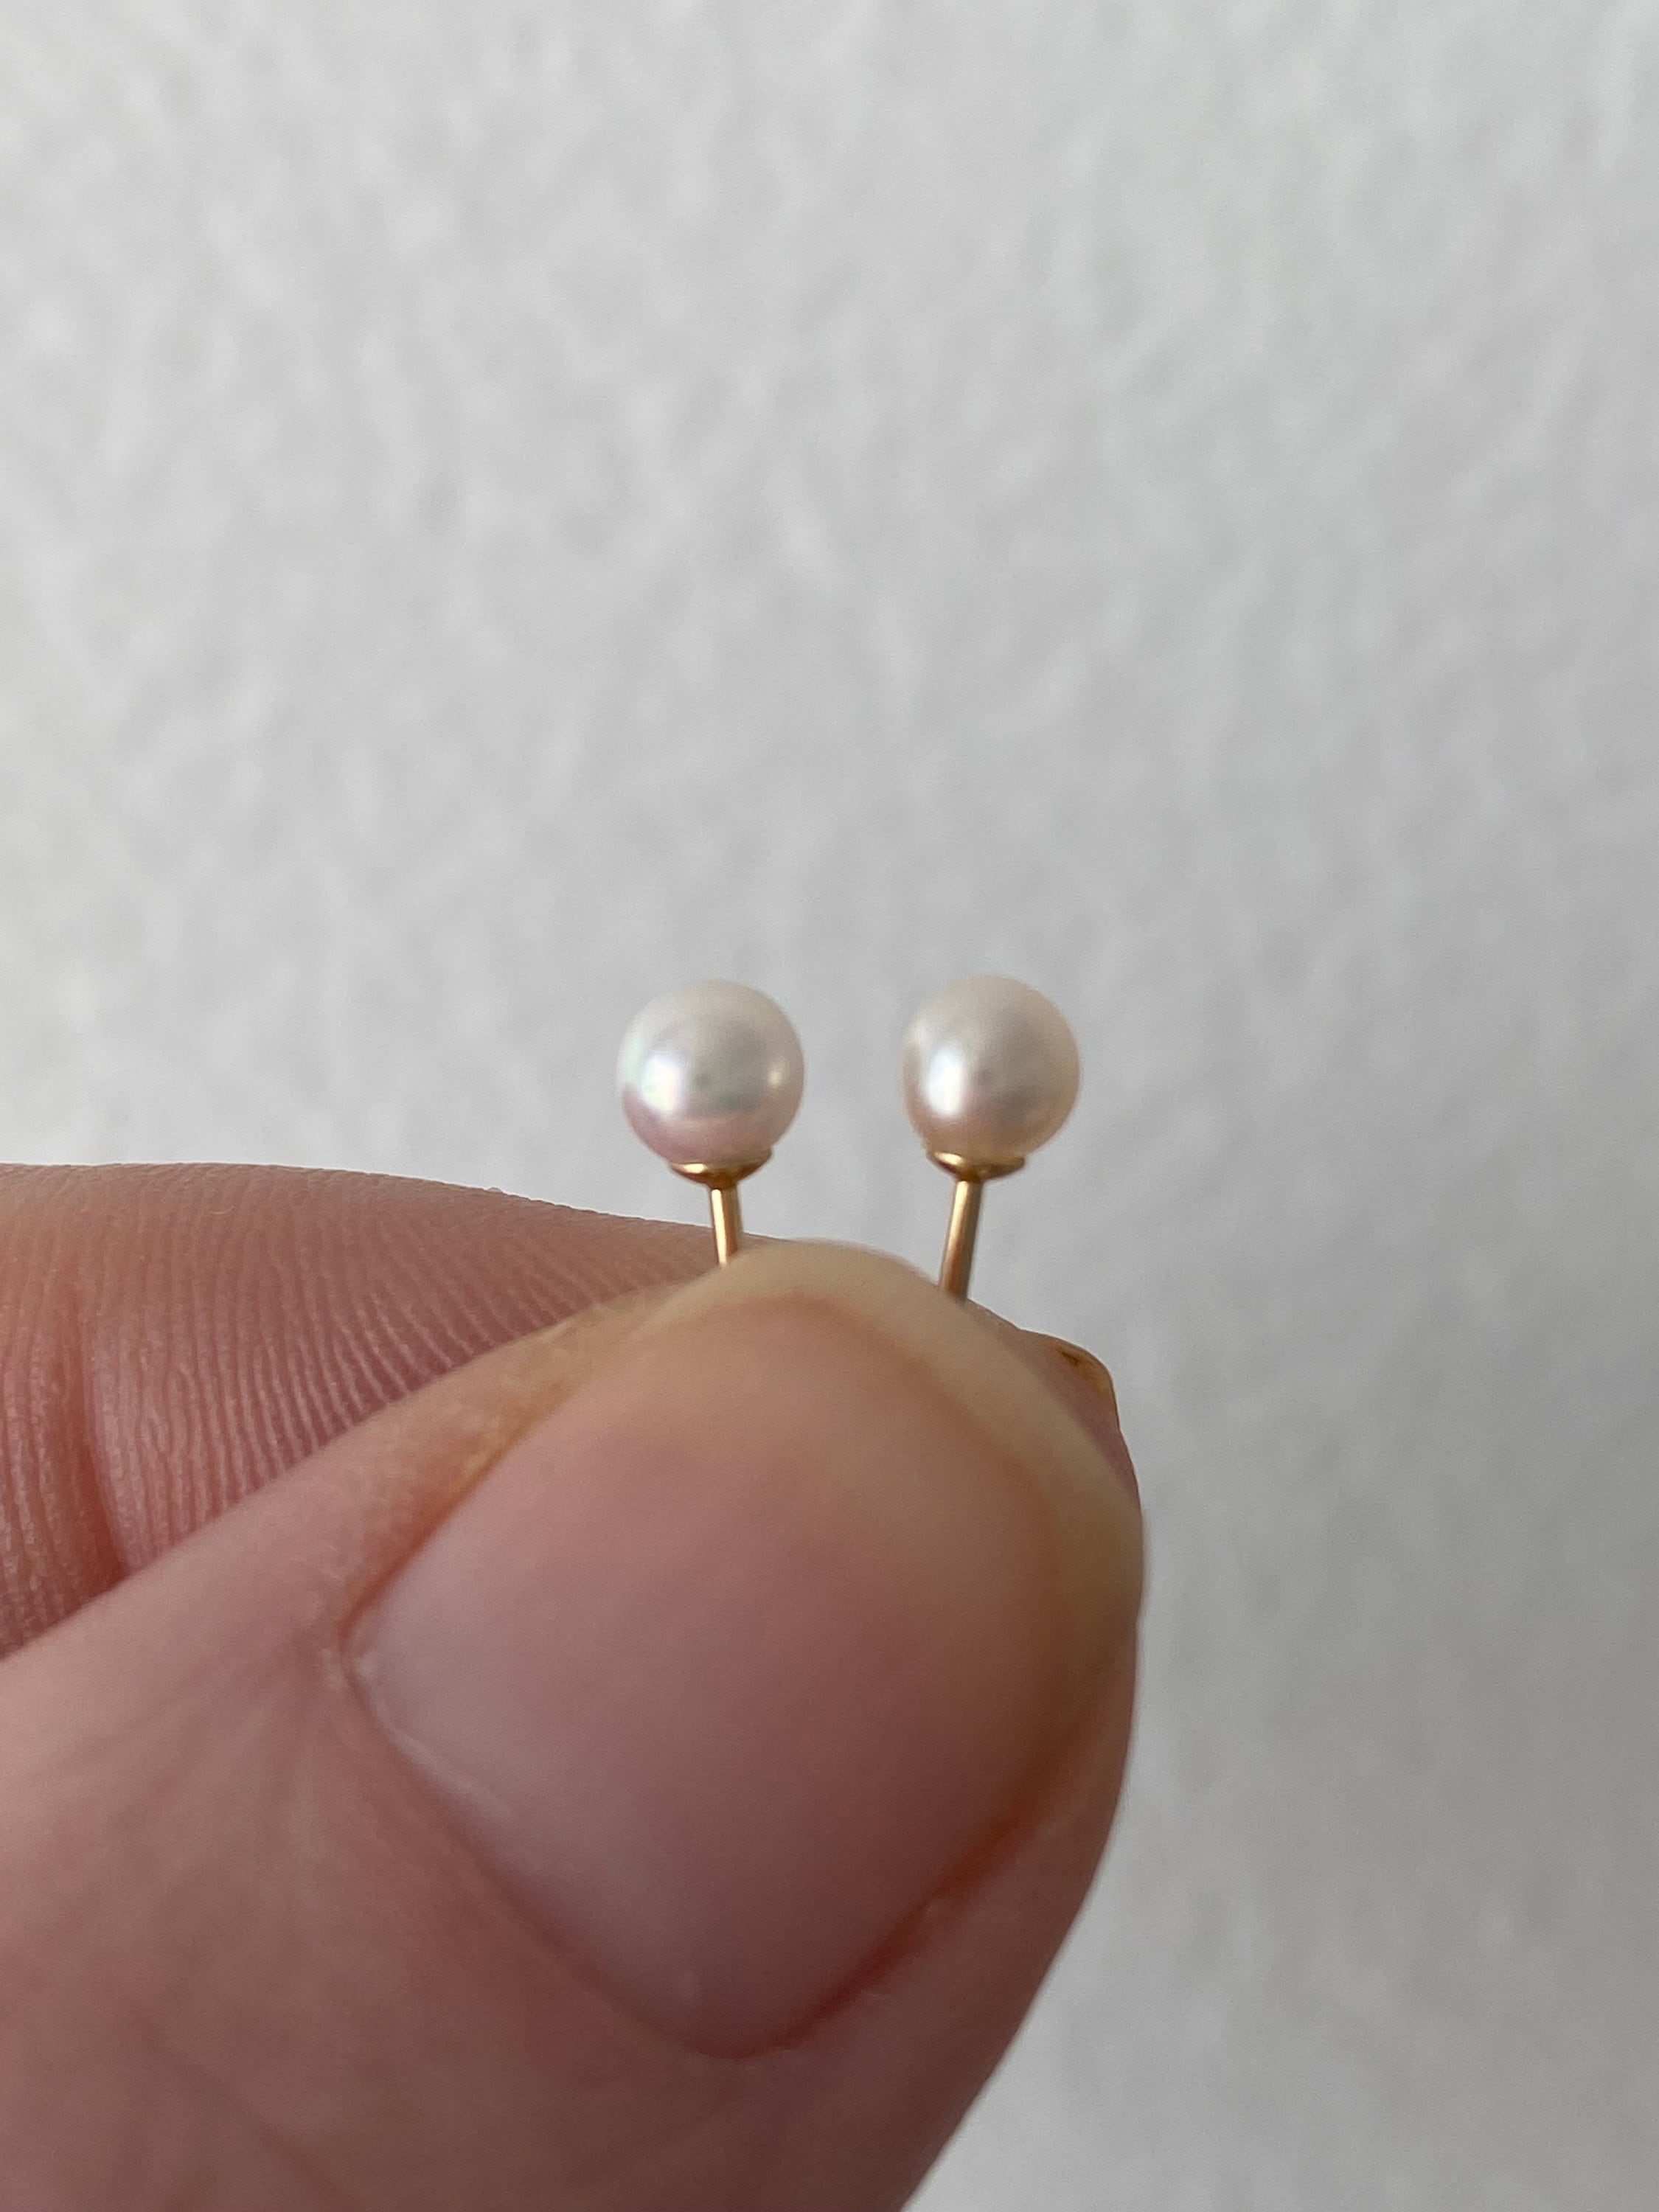 Classic Akoya Pearl Stud Earrings with Solid 14K Yellow Gold Post and Back, 4mm.